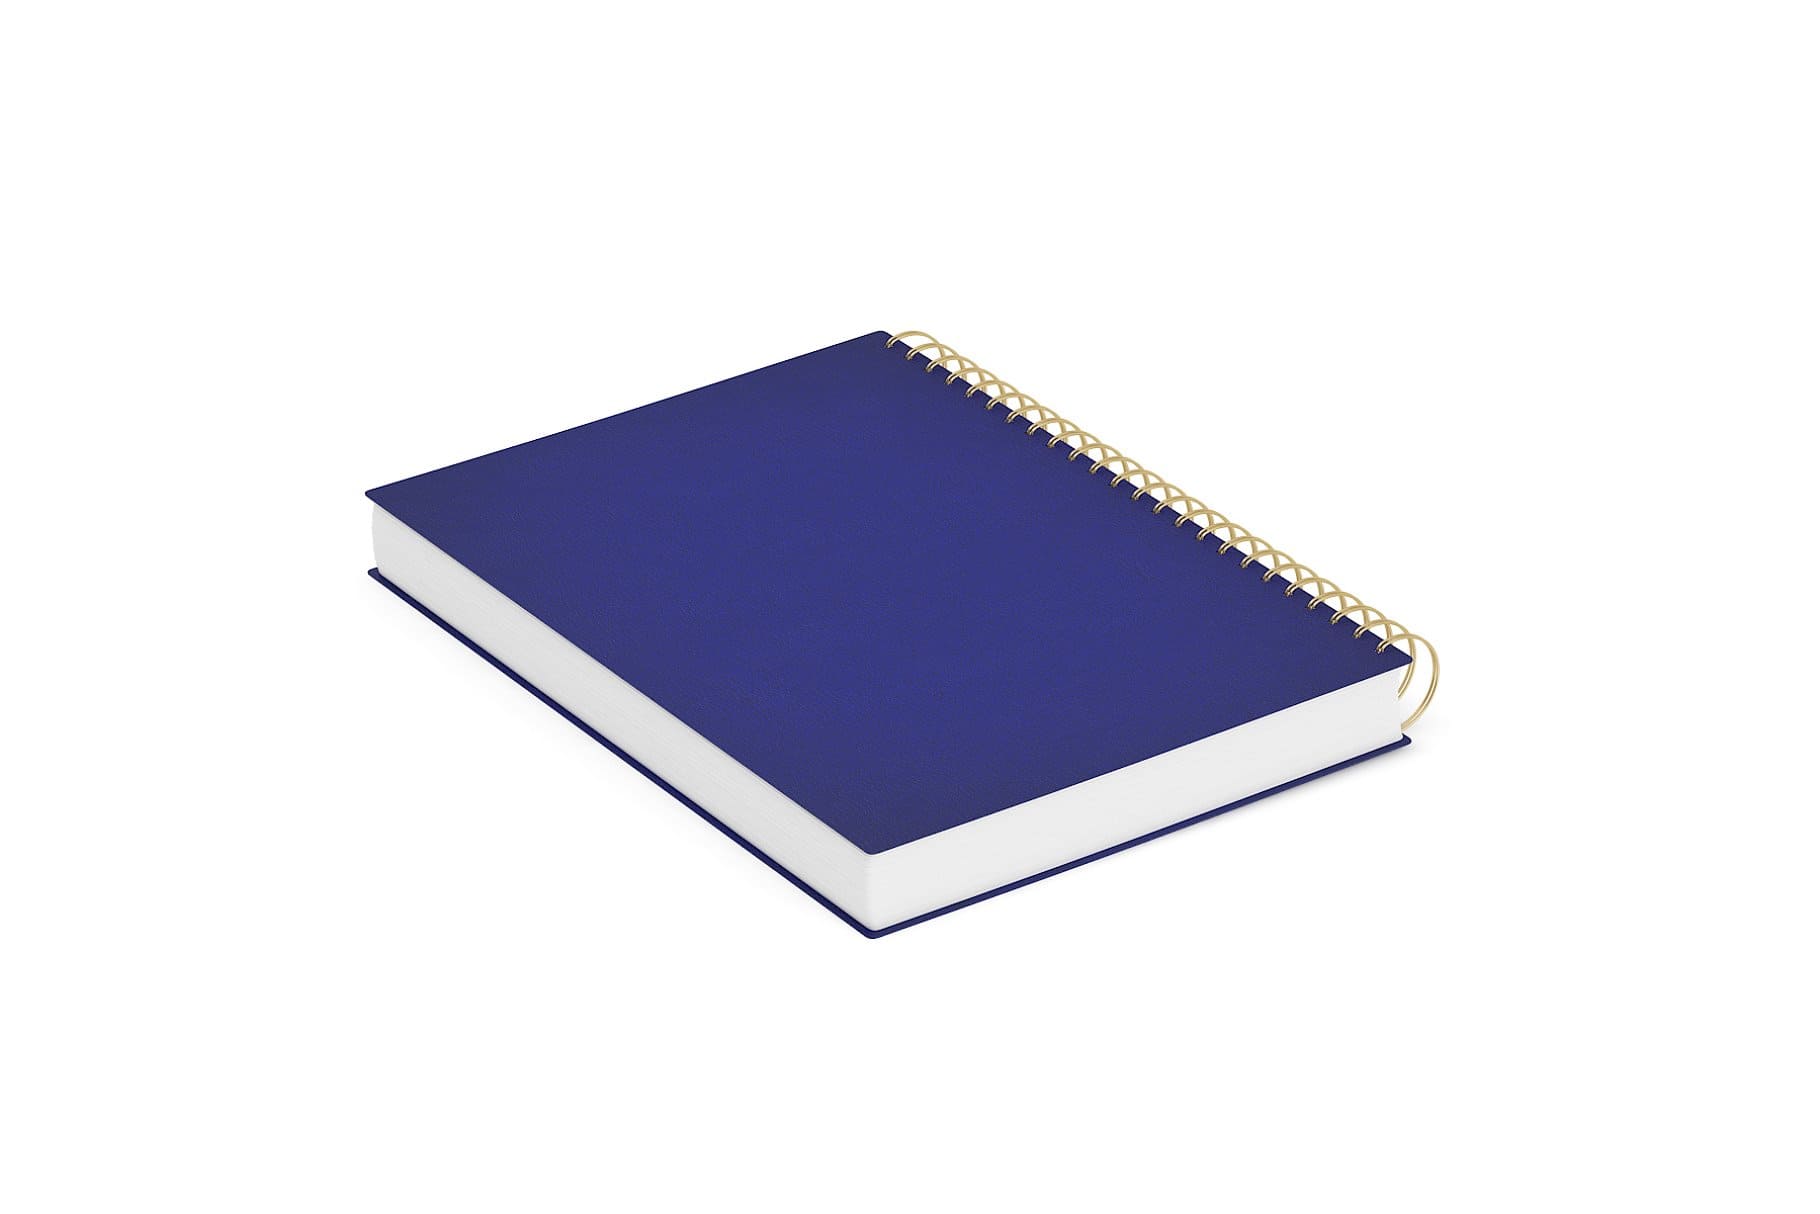 Spring-loaded notebook with blue binding.